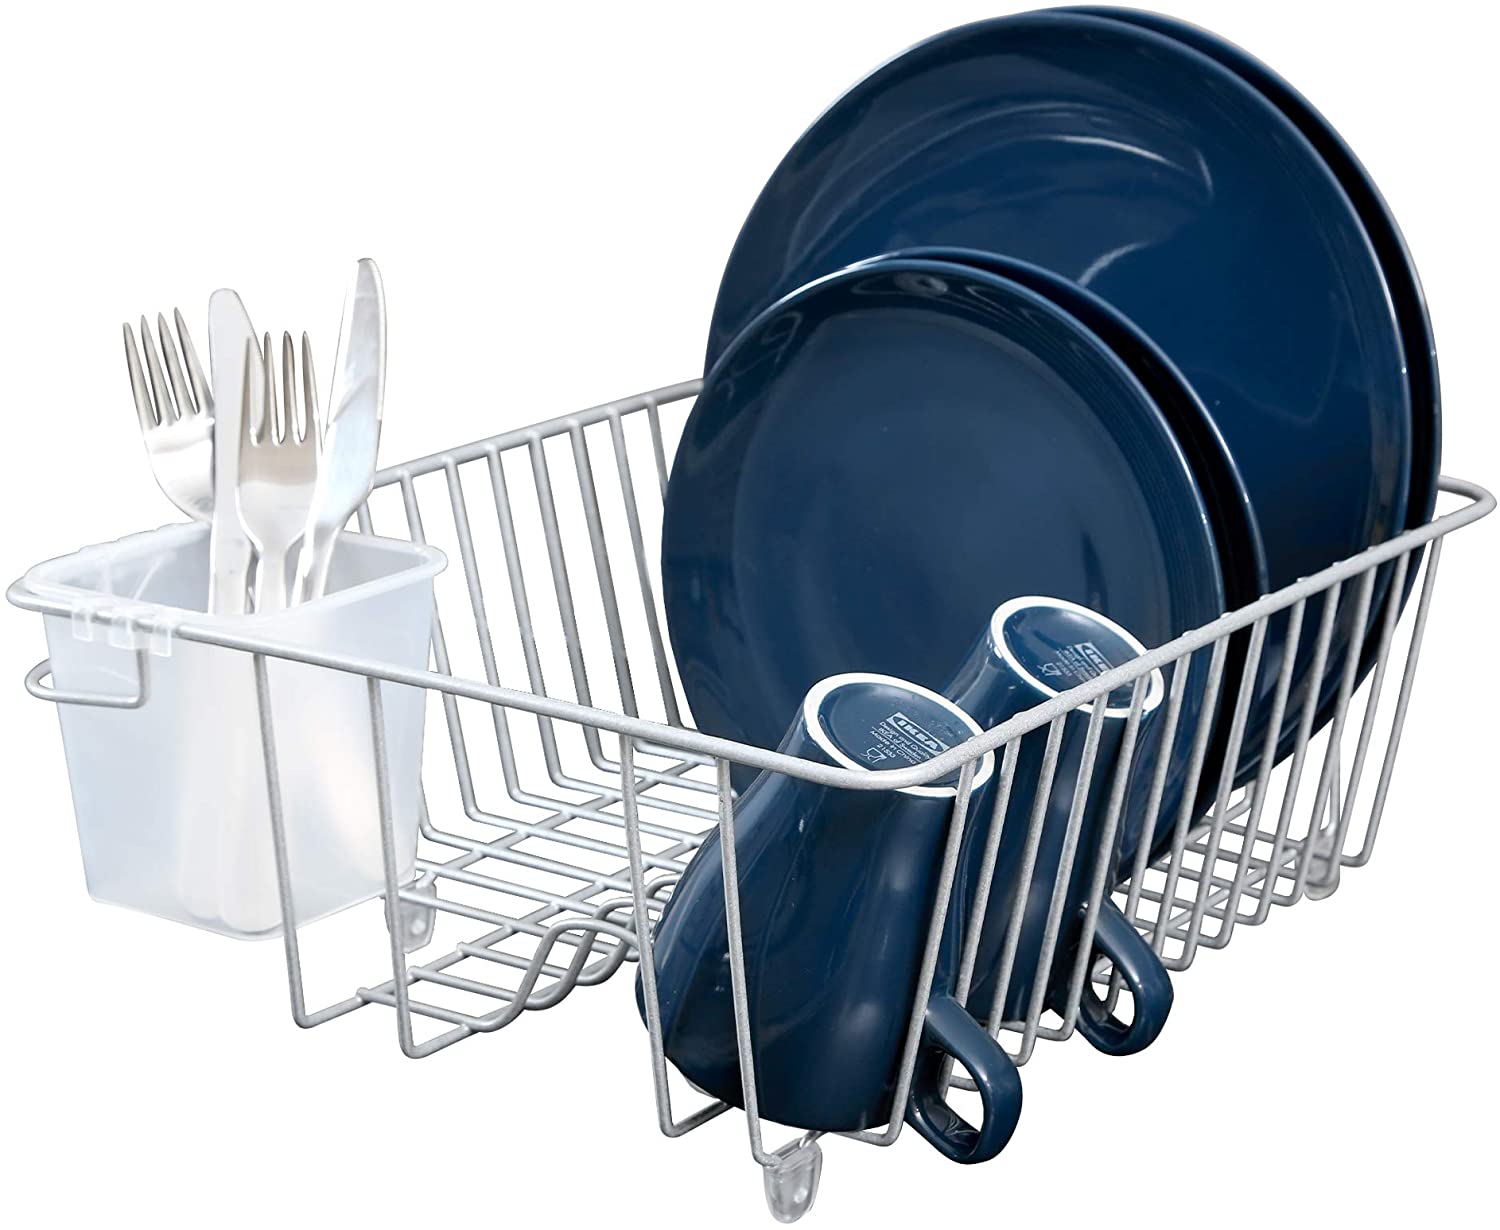 Expandable Dish Drainer Rack - Rose Gold - 13.5 x 20.63 Inch